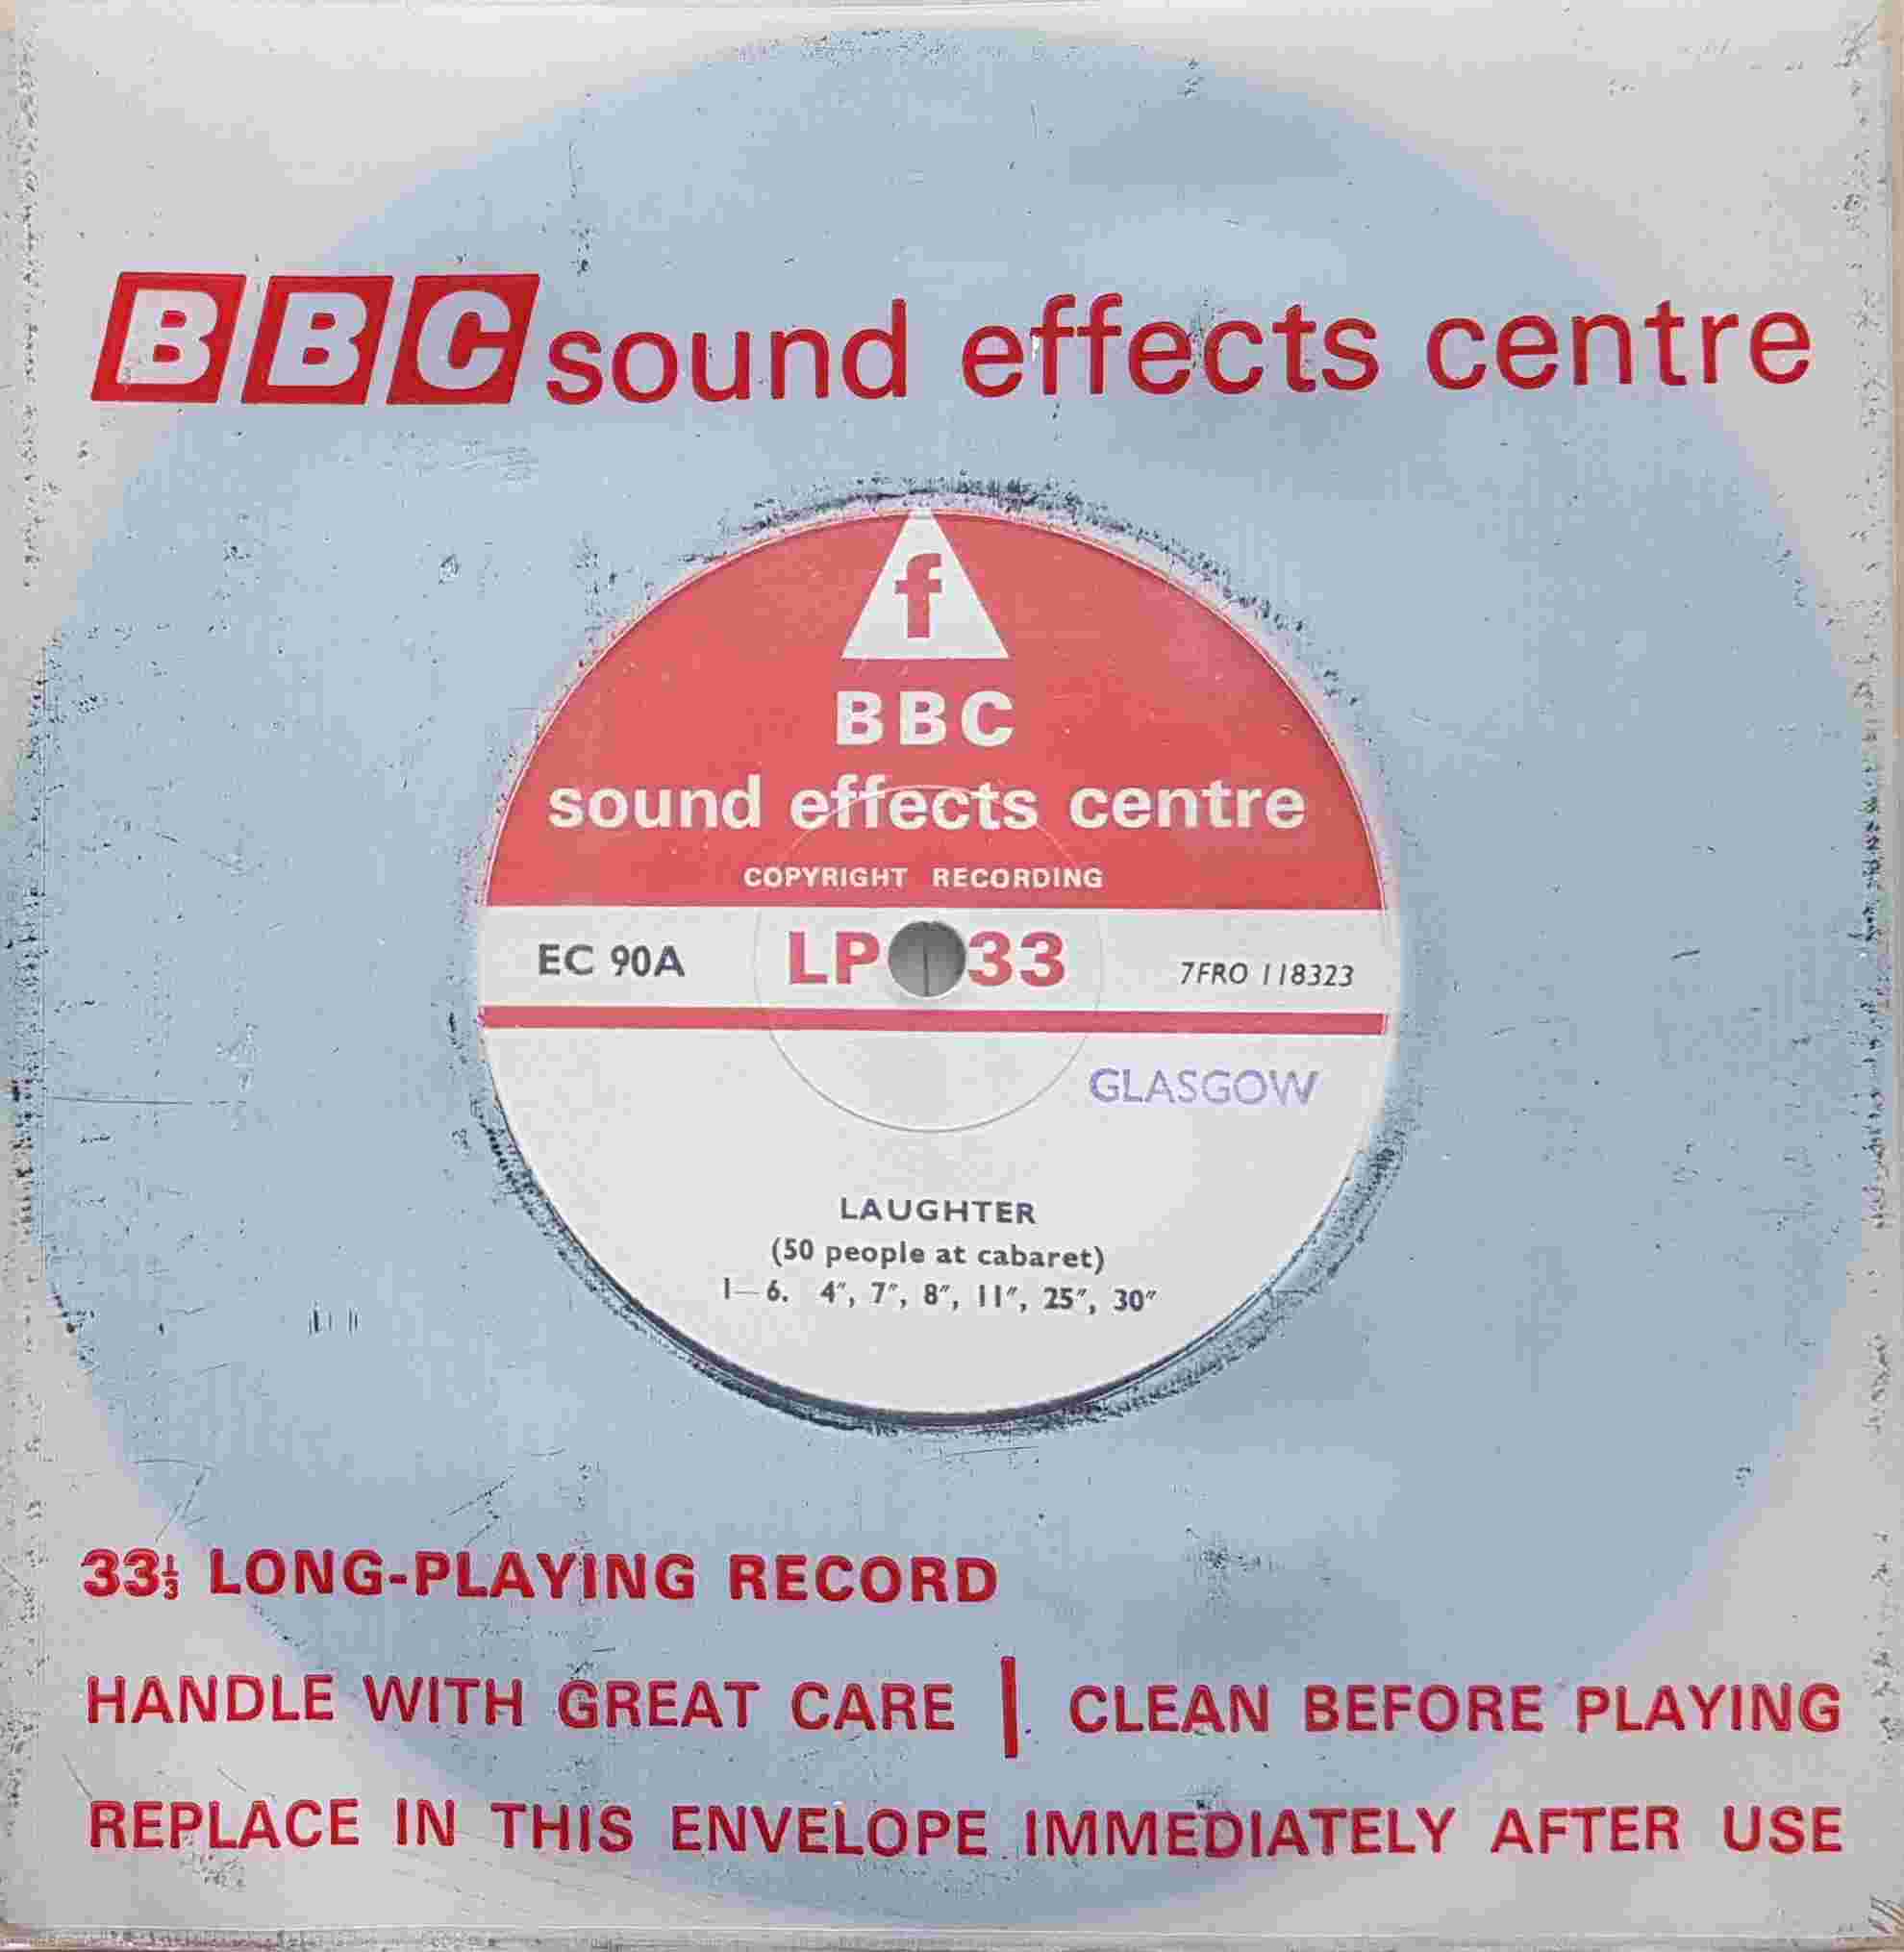 Picture of EC 90A Laughter by artist Not registered from the BBC singles - Records and Tapes library